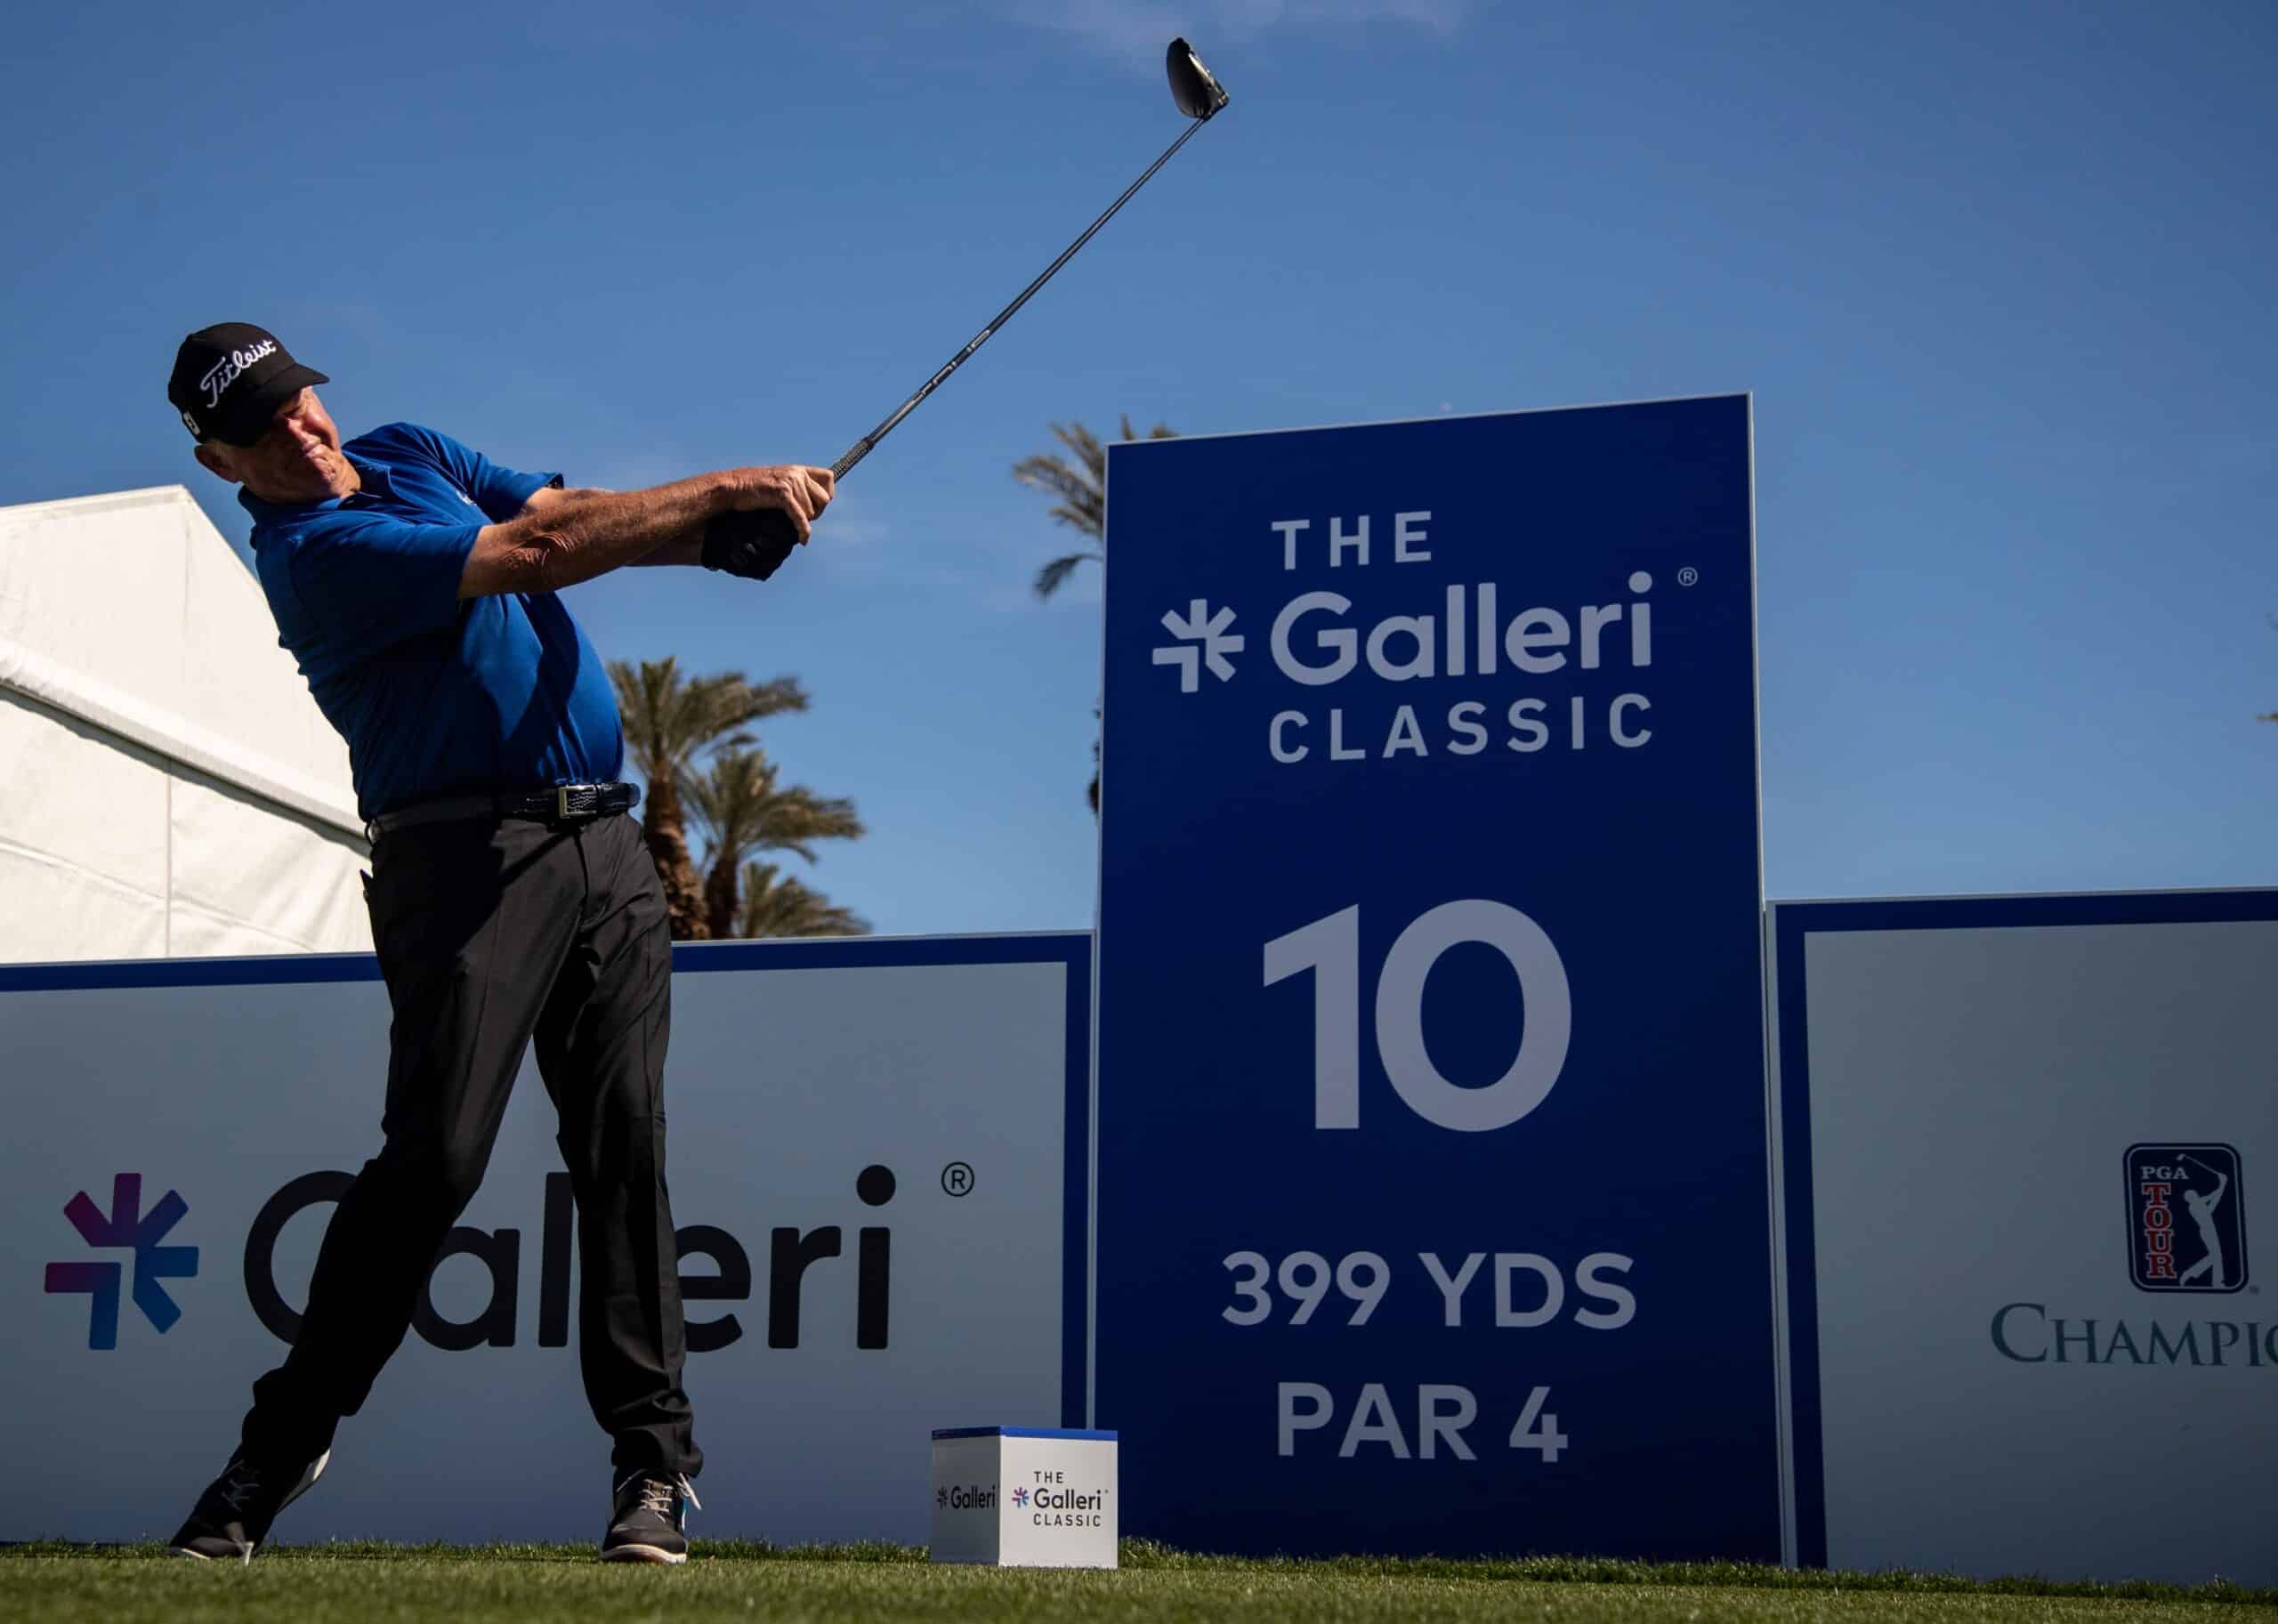 PGA Tour Viewership Numbers Are On The Rise